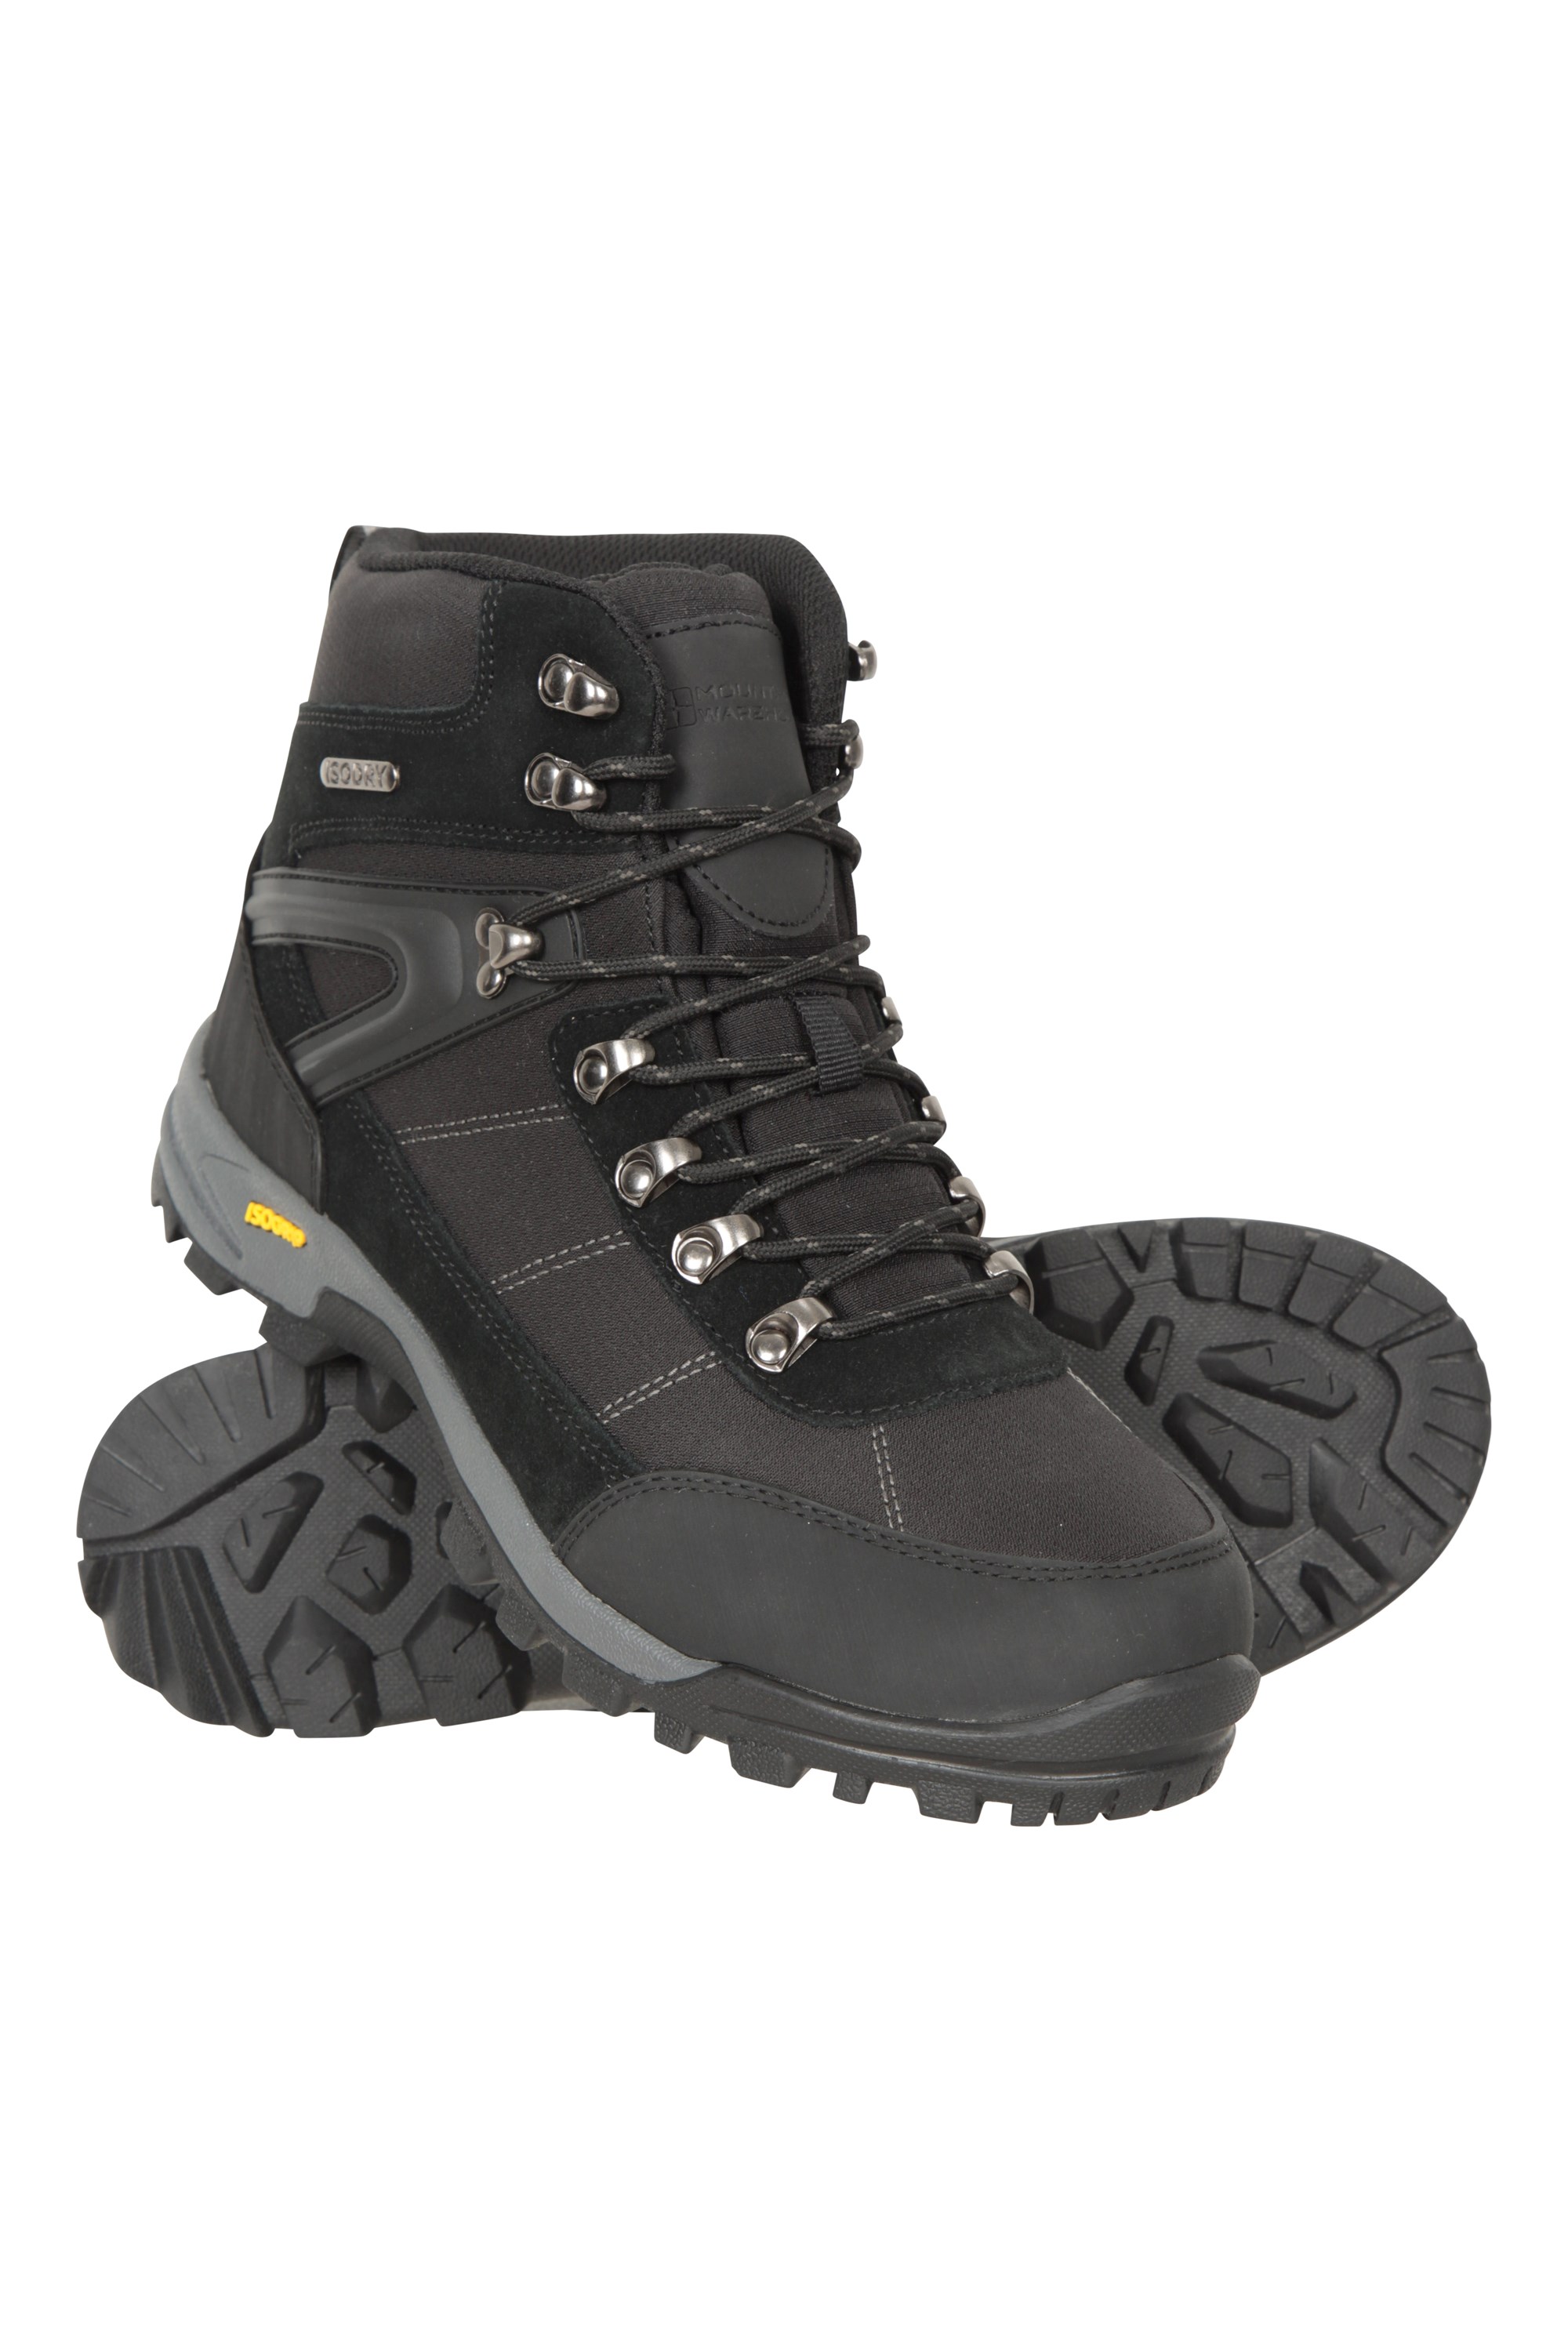 Storm Extreme Mens IsoGrip Waterproof Hiking Boots